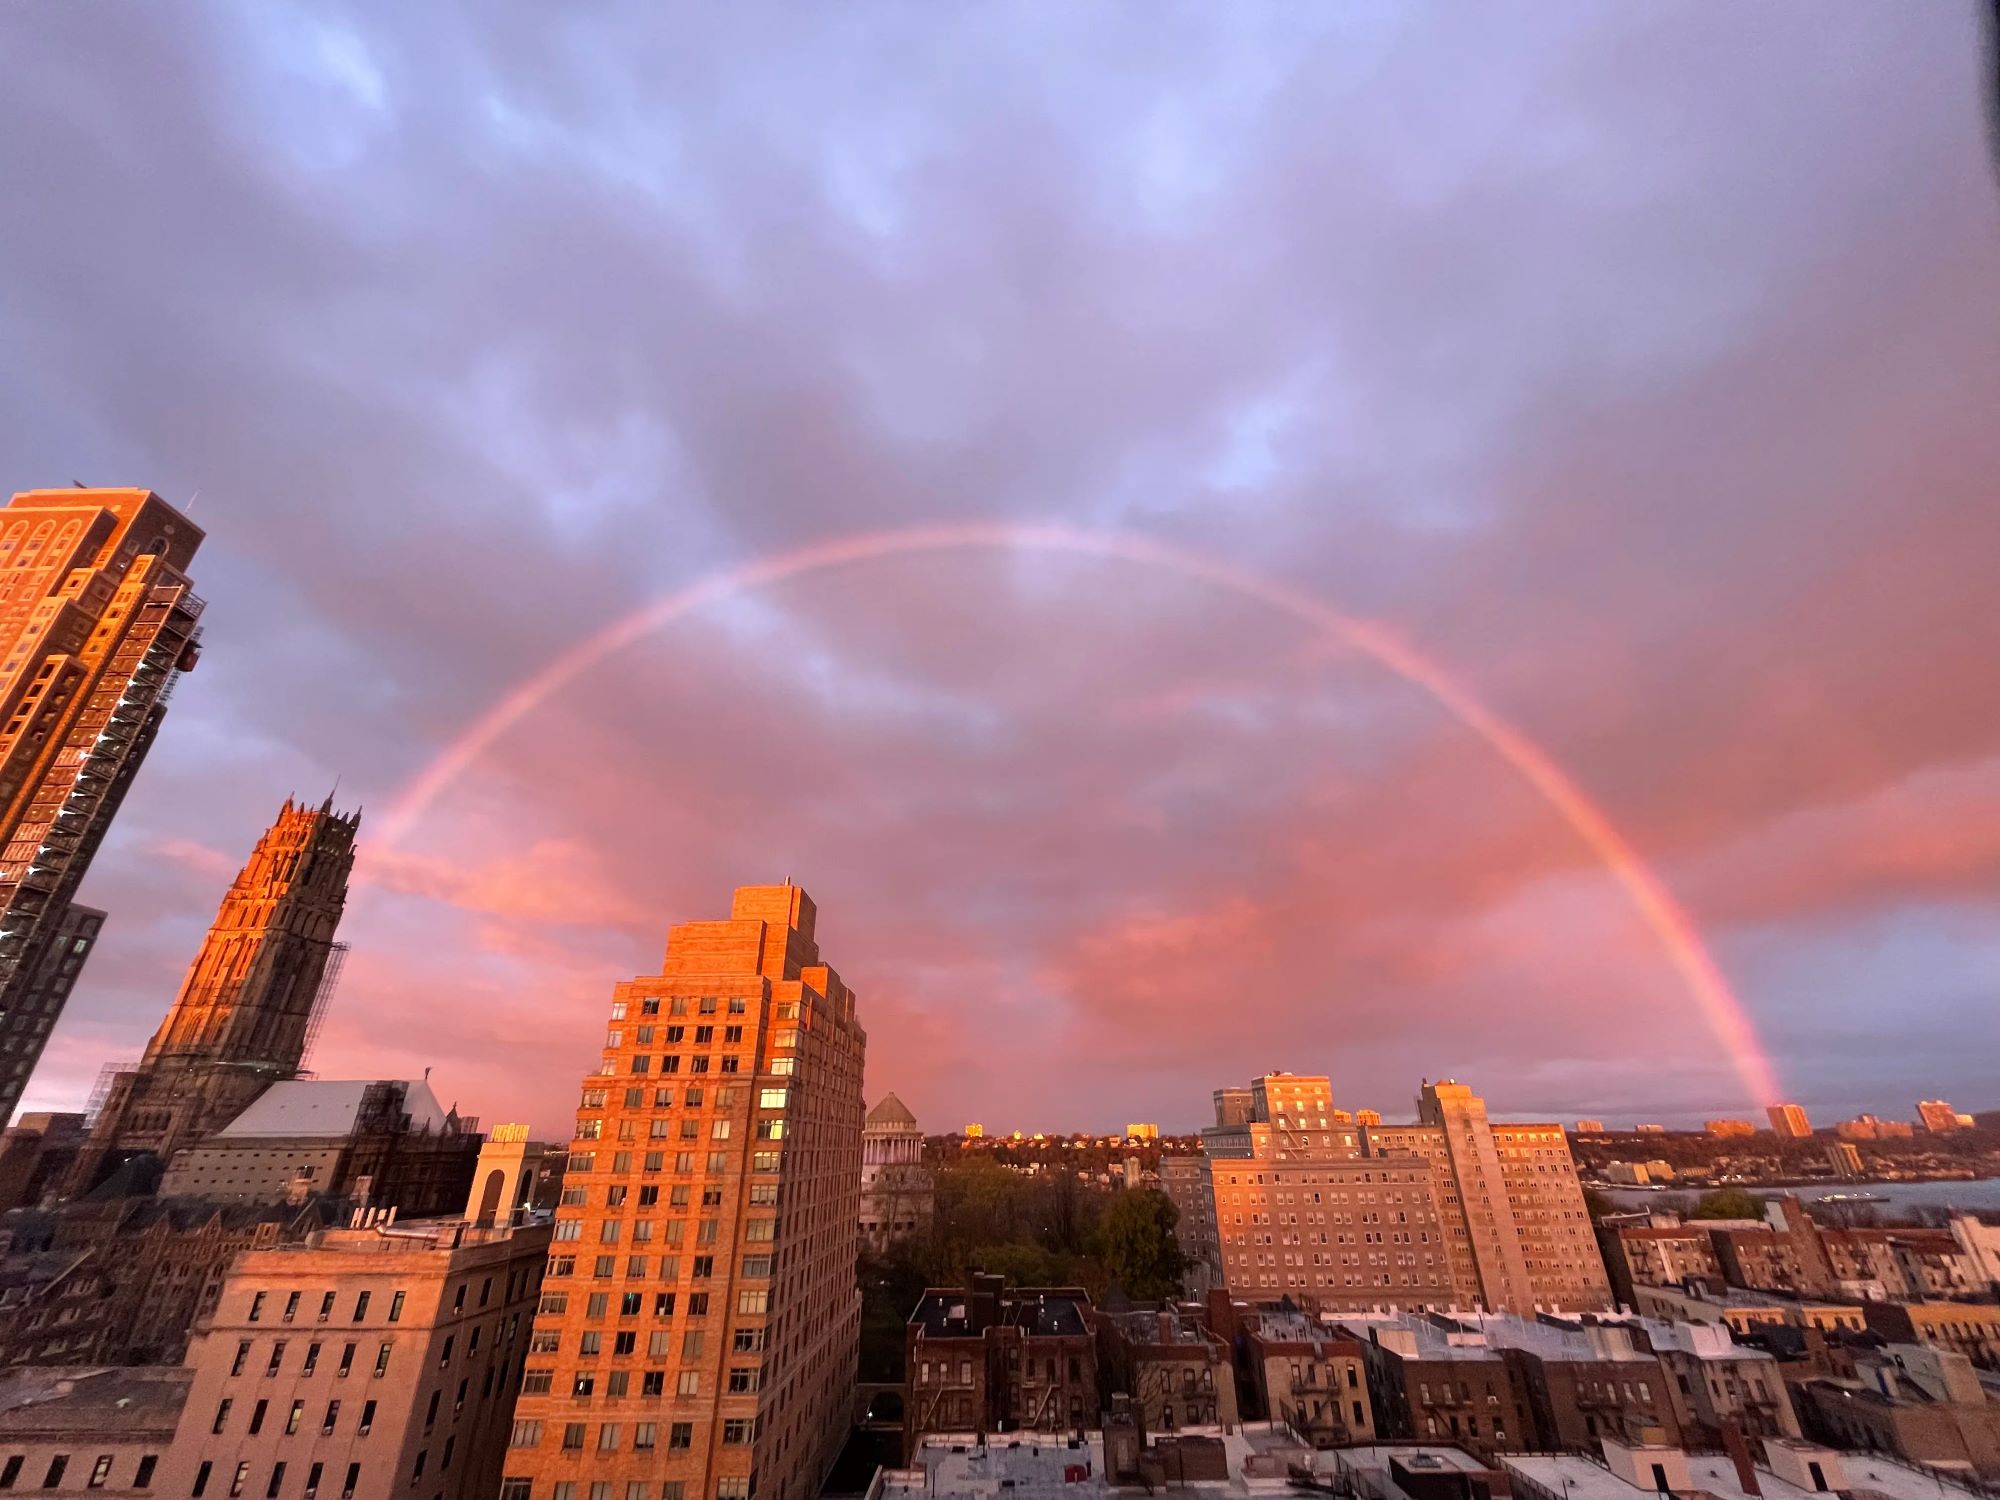 A Double Rainbow Appears Over New York City On 9/11 Anniversary